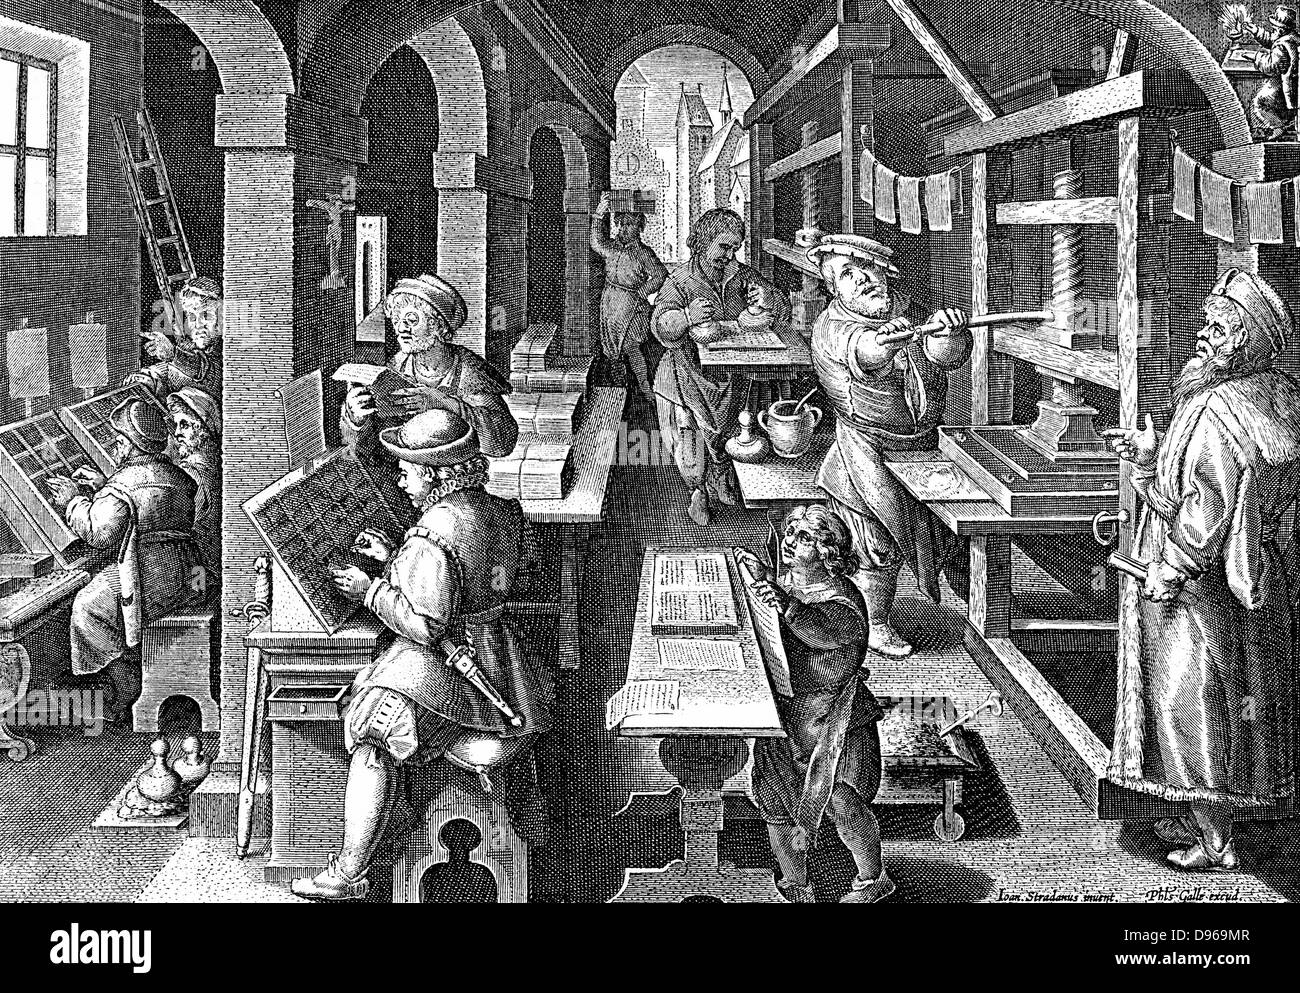 Printing office. On left compositors are at work setting up text using letters from 'case' in front of them.  Centre back type is being inked ready to be printed on to paper in flatbed screwjack press centre right. Paper hung up to allow ink to dry before being stacked in pile  by boy, centre front.  Master printer in fur lined gown supervises his enterprise.    After Stradanus (Jan van der Straet) 'Nova reperta' Antwerp c1600. Engraving Stock Photo